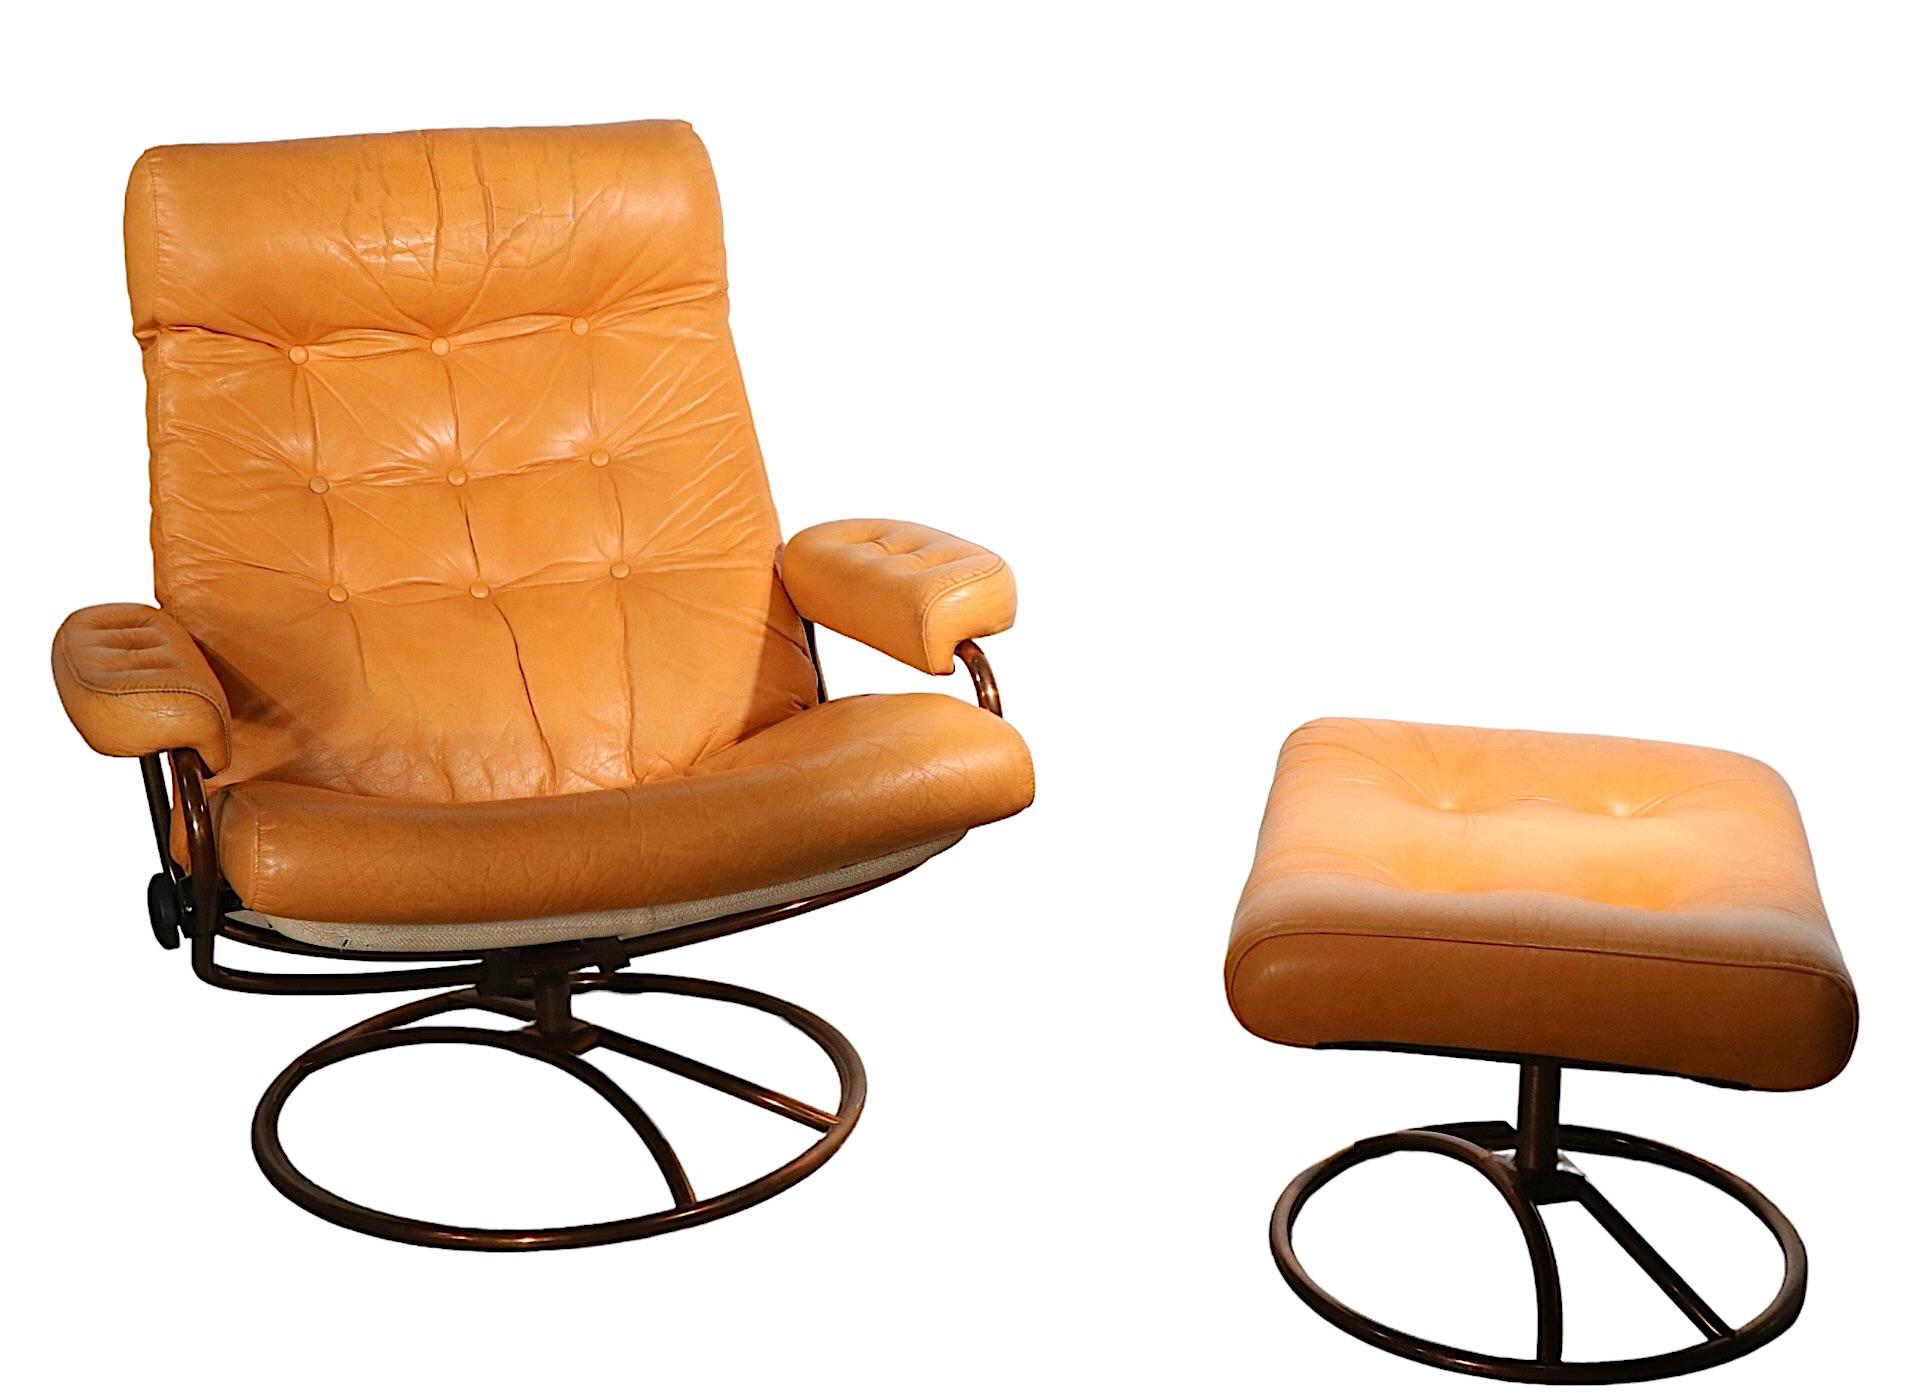 Vintage Ekornes Stressless Leather Swivel Reclining Lounge Chair and Ottoman 3